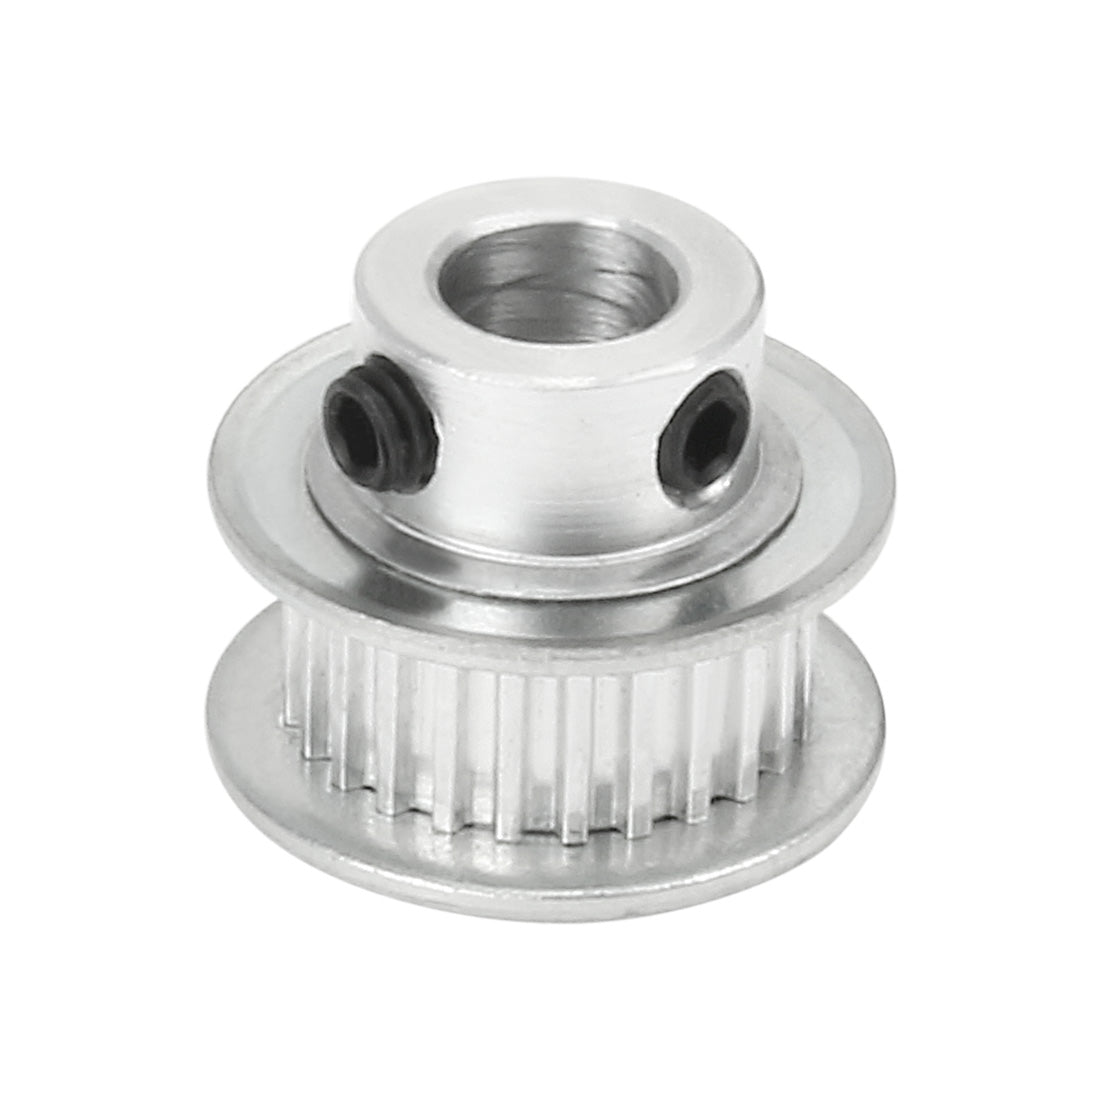 uxcell Uxcell Aluminum M-X-L 25 Teeth 7mm Bore Timing Belt Idler Pulley Flange Synchronous Wheel for 6mm Belt 3D Printer CNC